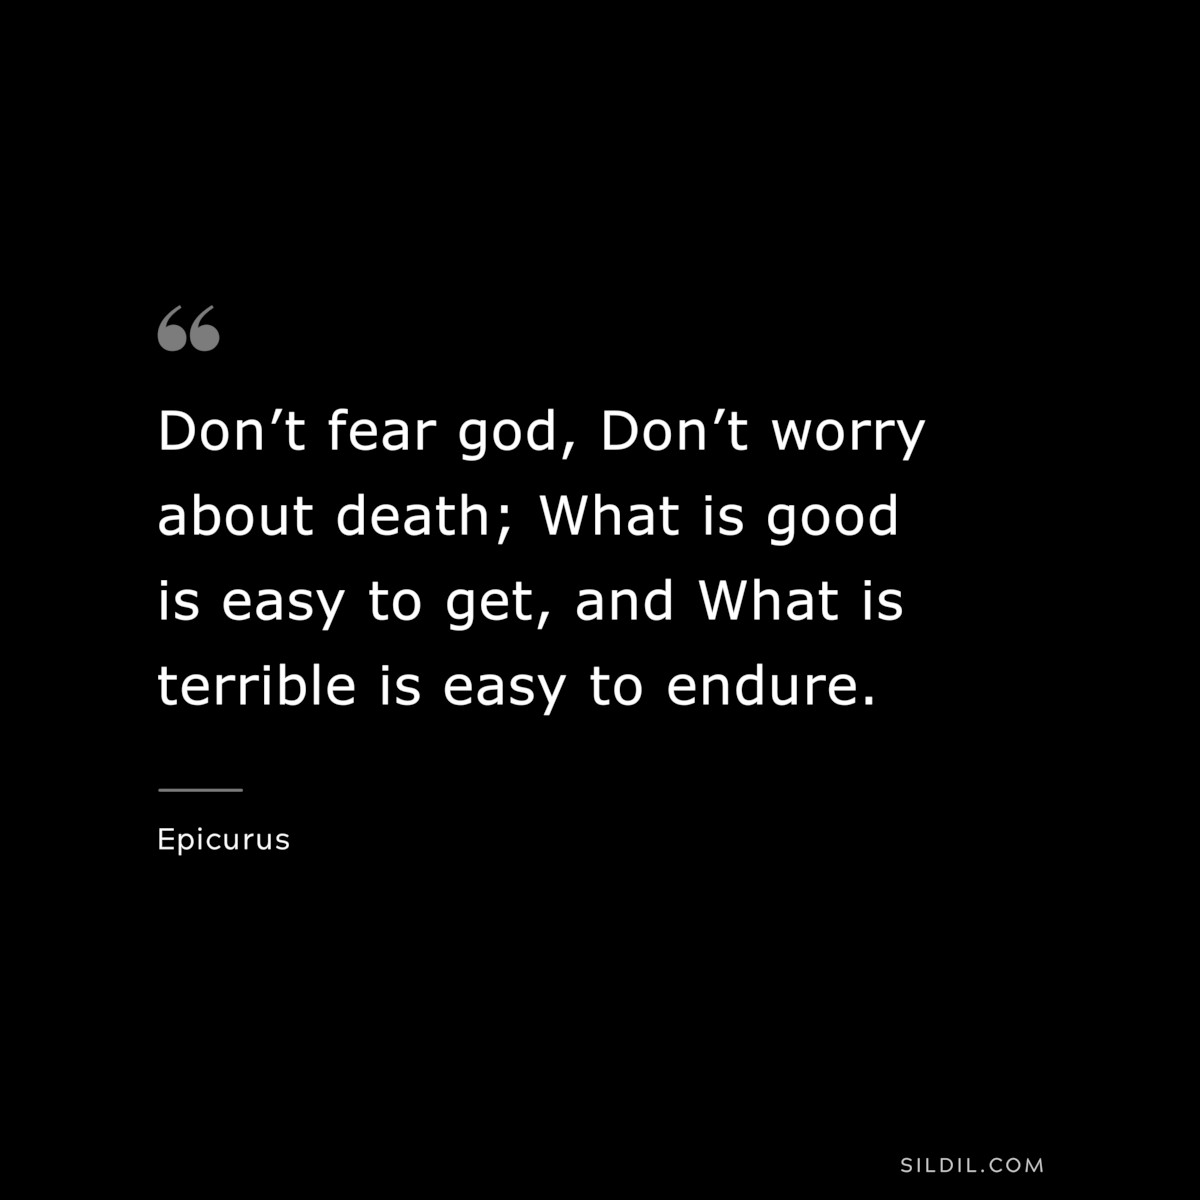 Don’t fear god, Don’t worry about death; What is good is easy to get, and What is terrible is easy to endure. — Epicurus